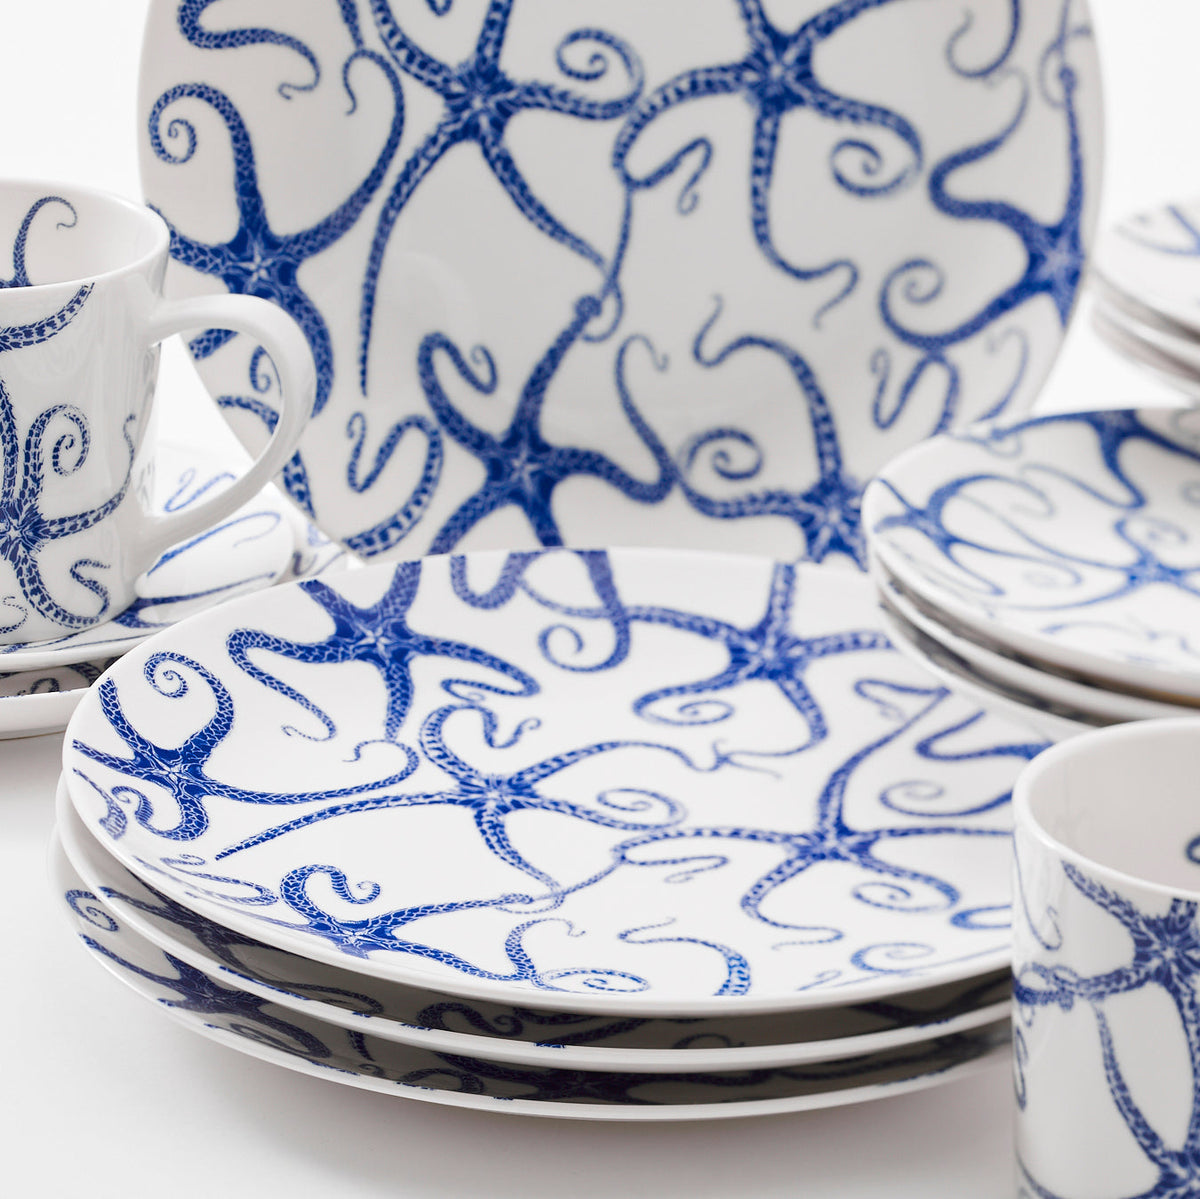 A trendy collection of blue and white porcelain dinnerware, featuring the charming Starfish Blue Coupe Salad Plate designs from Caskata Artisanal Home. This set includes salad plates to complete the coastal-inspired dining experience.